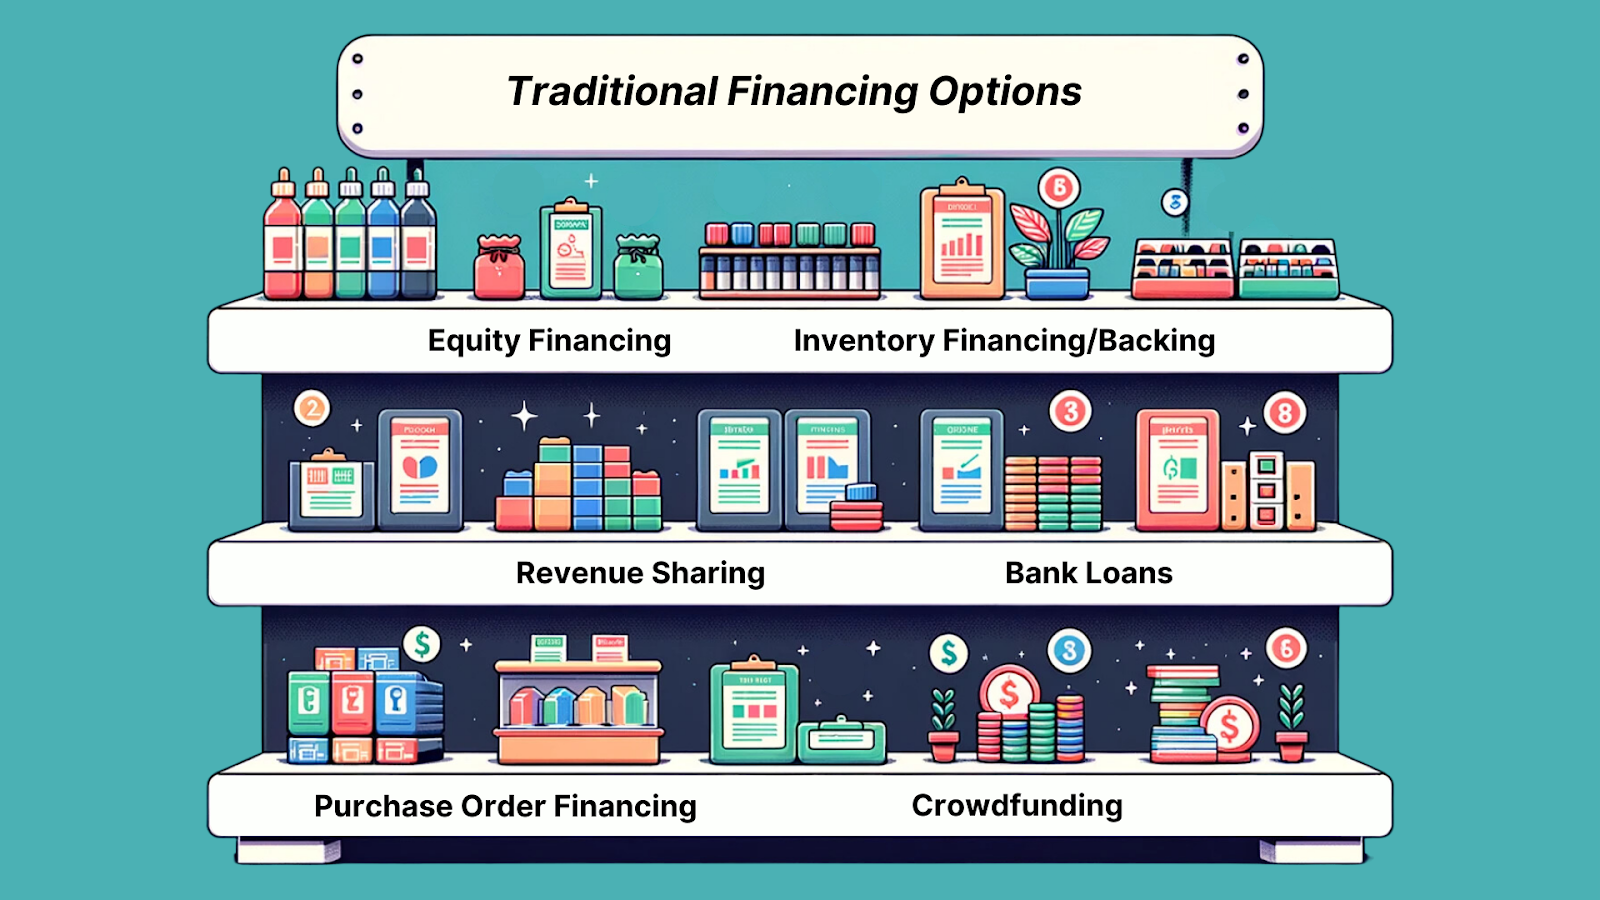 Image showing traditional financing options